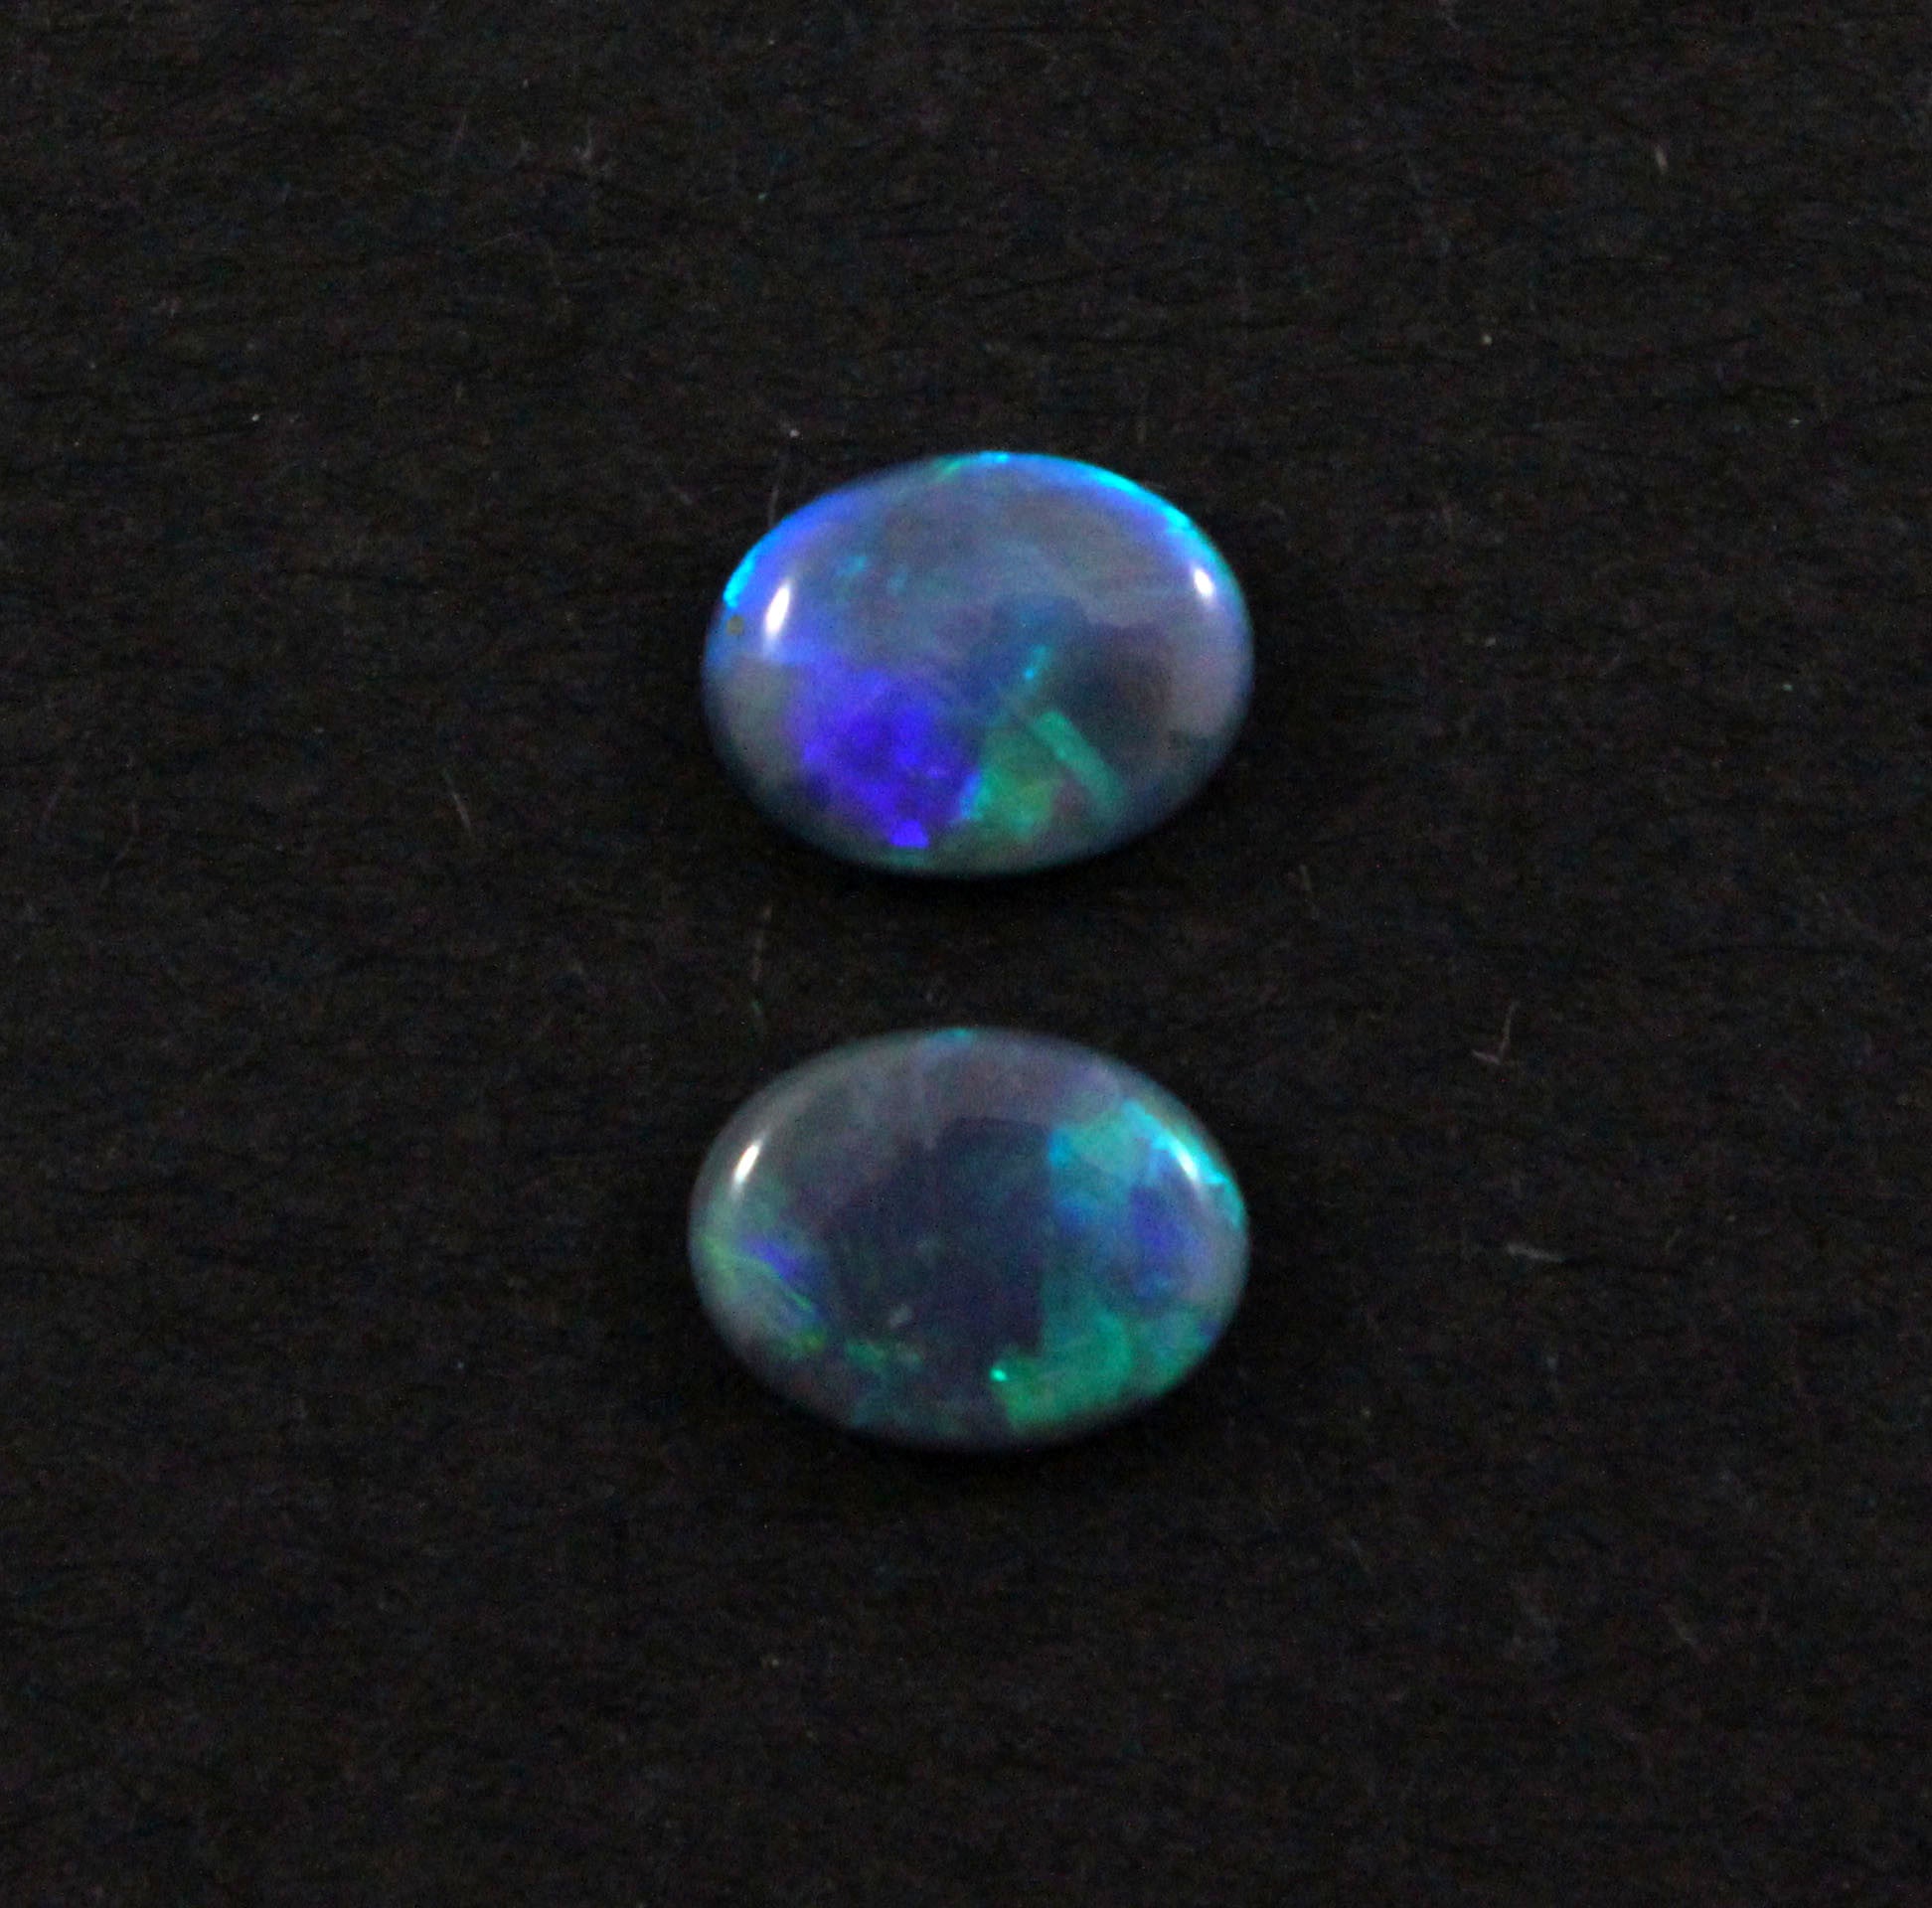 Australian black opal matched pair 1.68 carat total loose gemstone - Purchase only with custom order - Sarah Hughes - 3